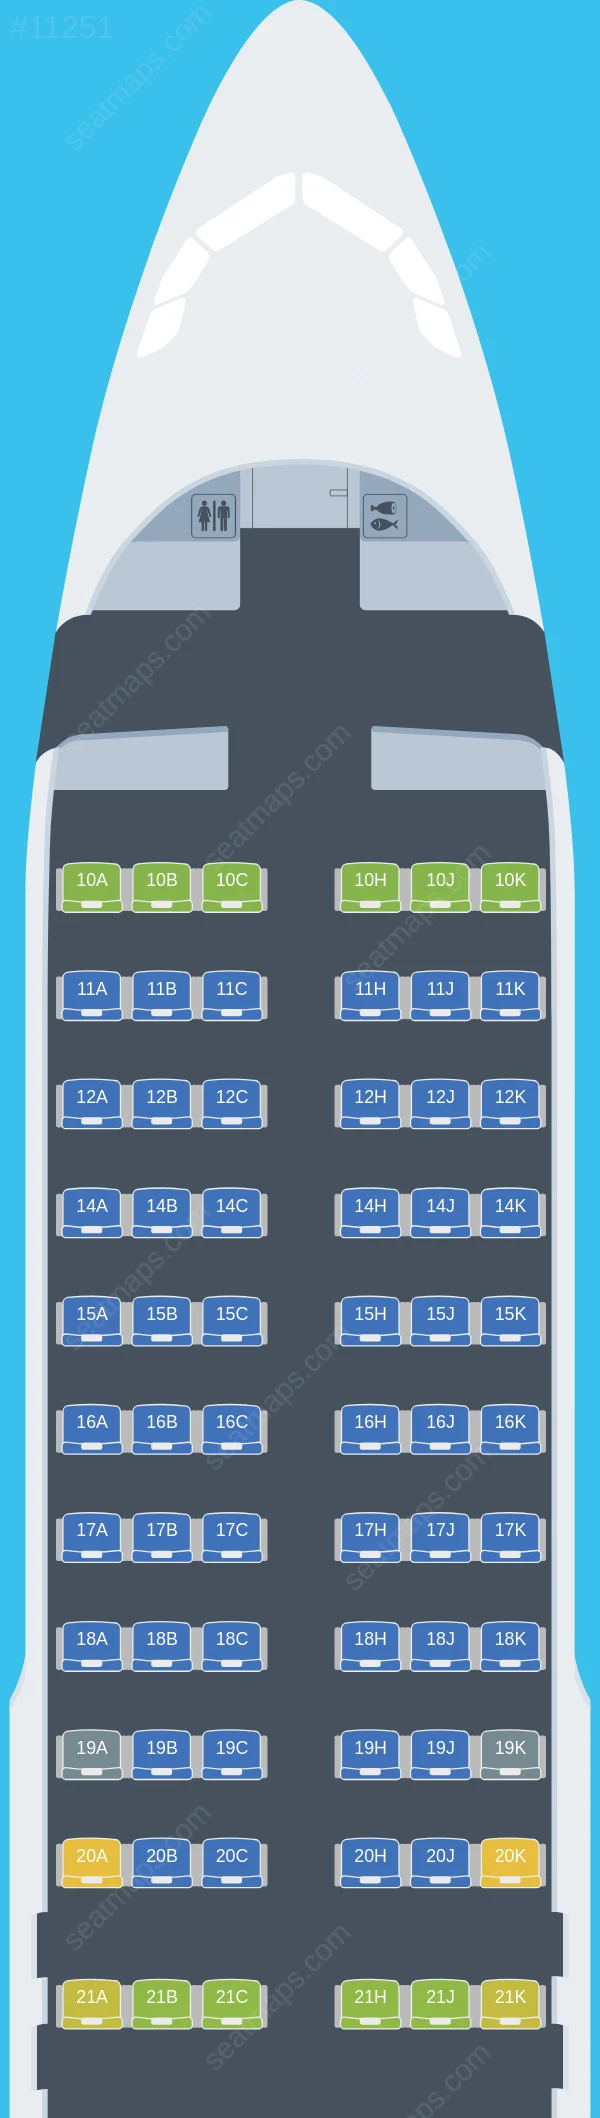 SmartLynx Airbus A320-200 V.2 seatmap preview